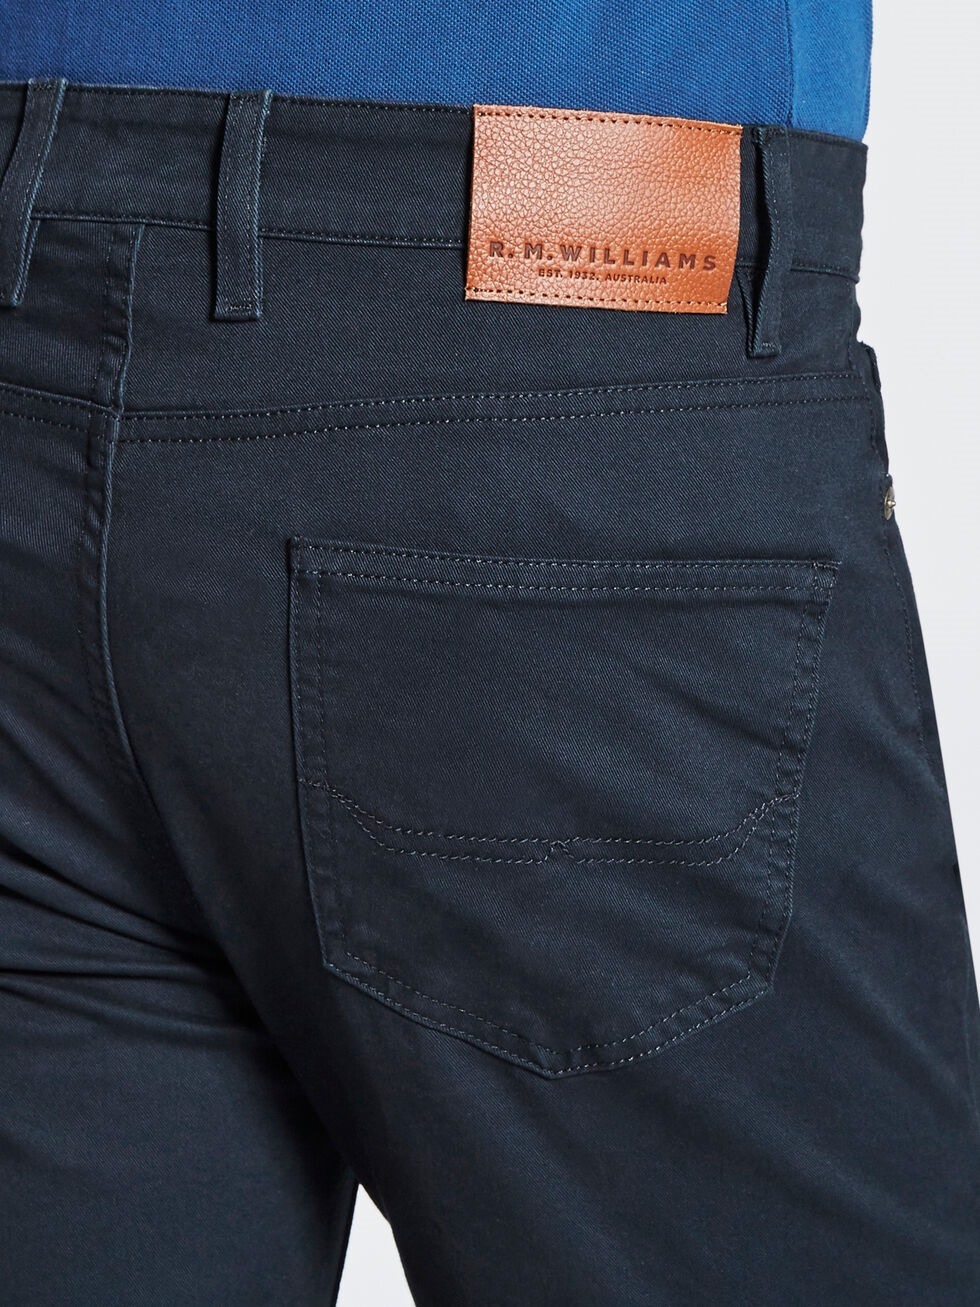 RM Williams Ramco Jeans Navy | Port Phillip Shop